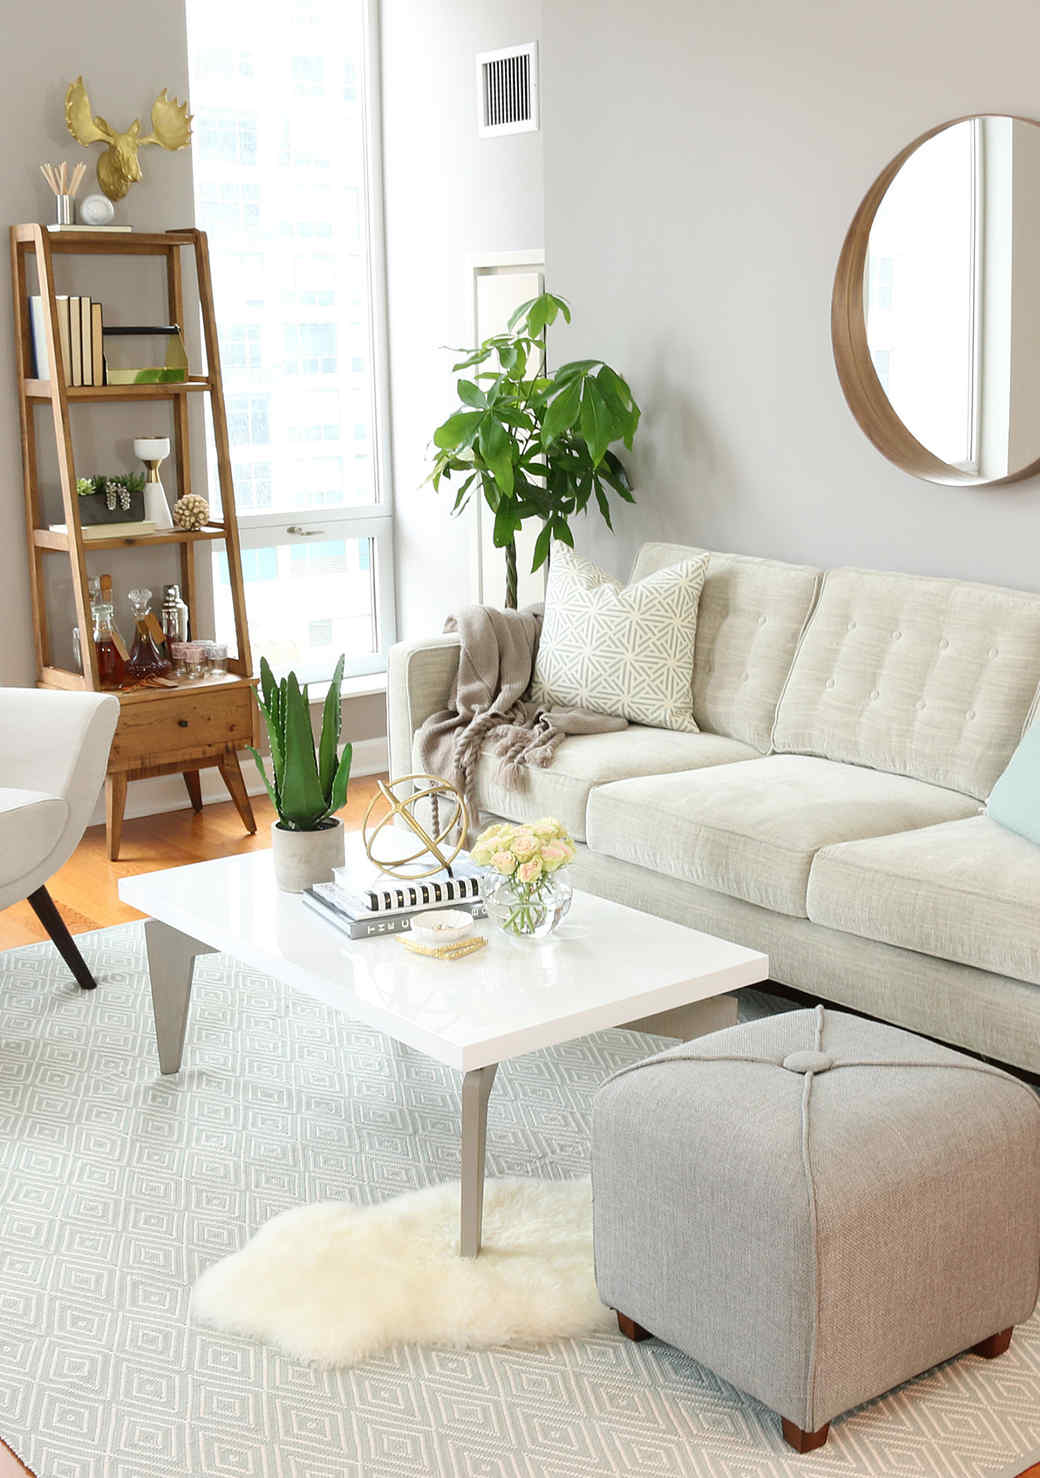 Where to Save and Where to Splurge On Your Décor